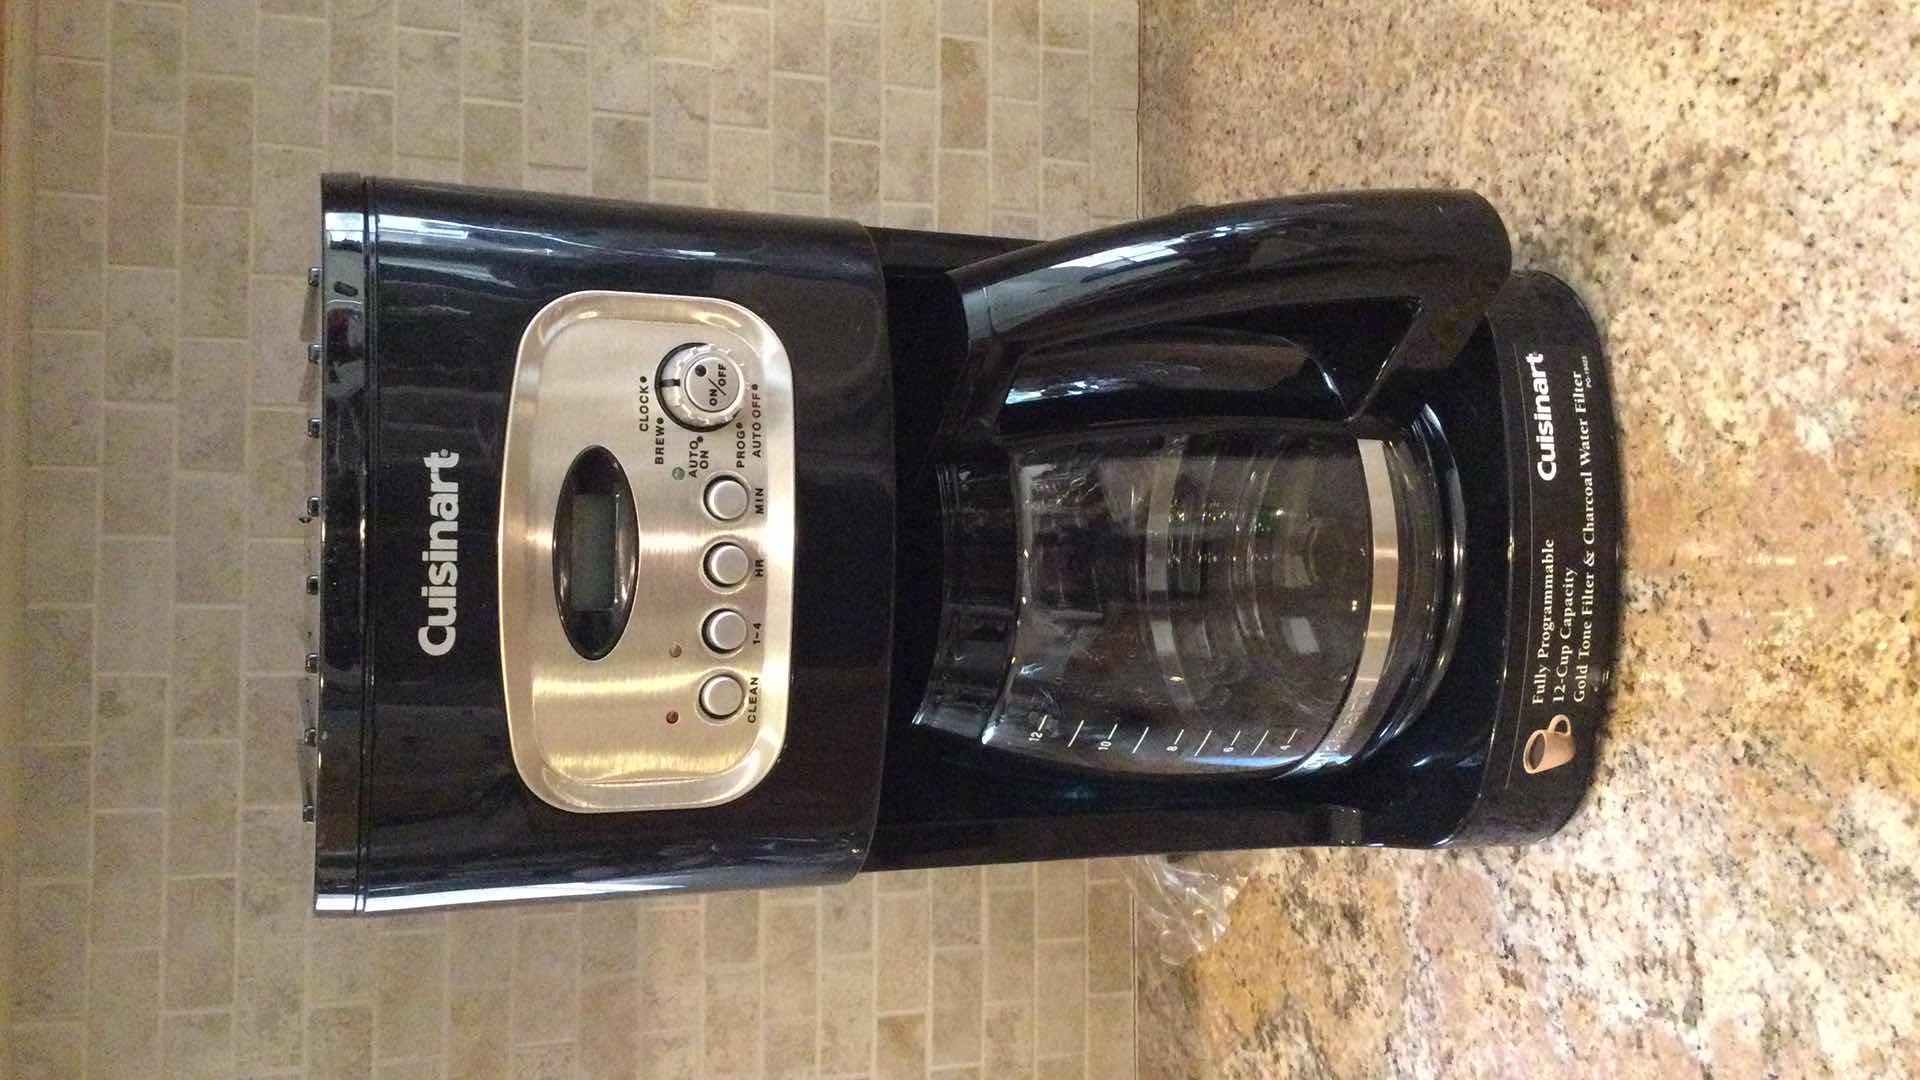 Photo 2 of CUISINART DCC-1100 SERIES 12-CUP PROGRAMMABLE COFFEEMAKER W/ CUT GLASS MUGS